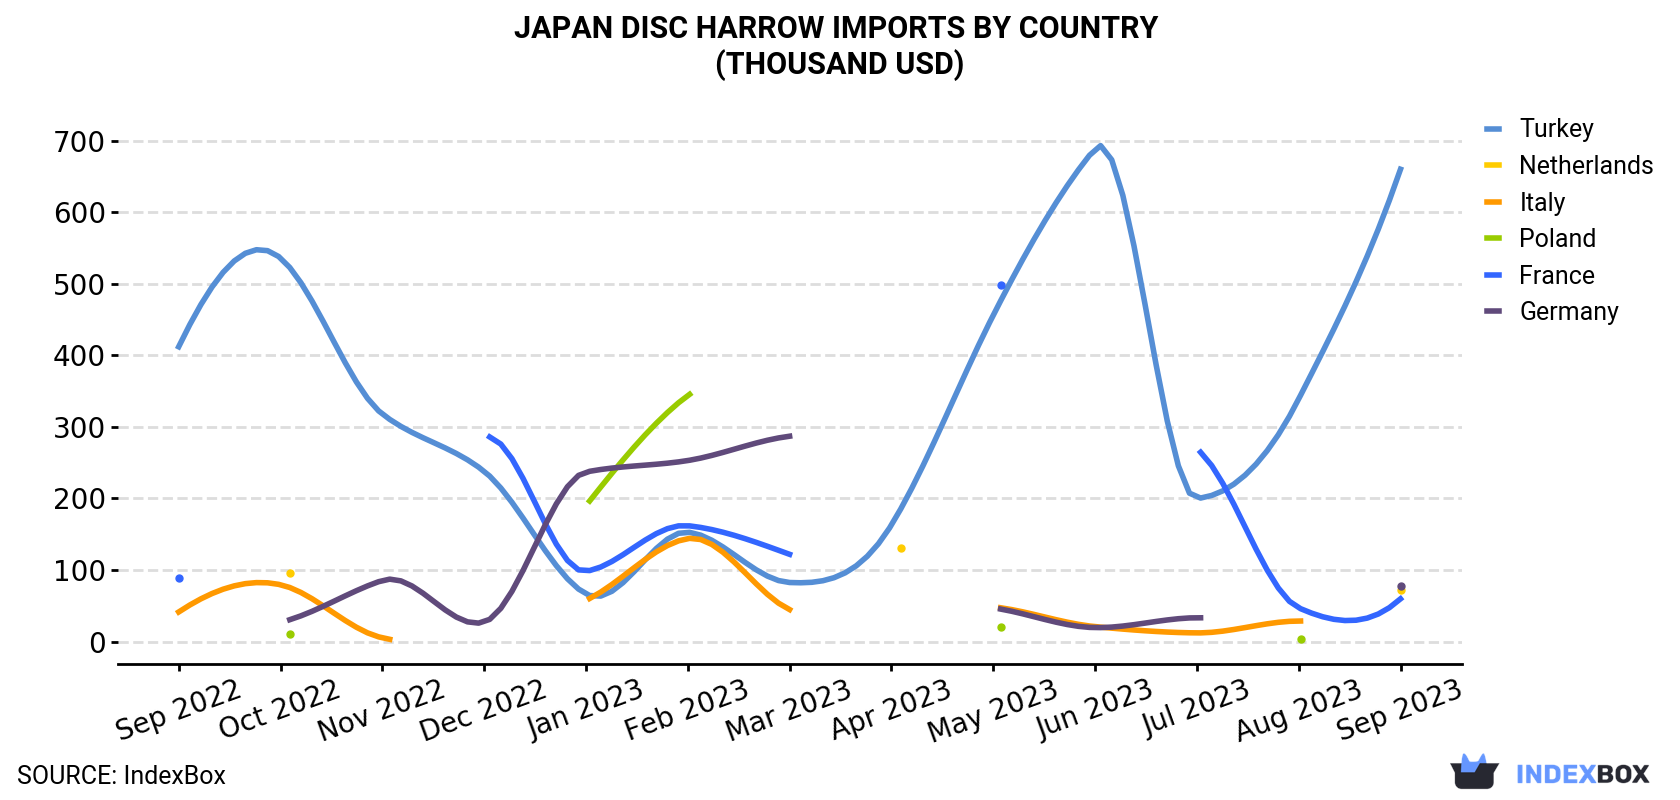 Japan Disc Harrow Imports By Country (Thousand USD)